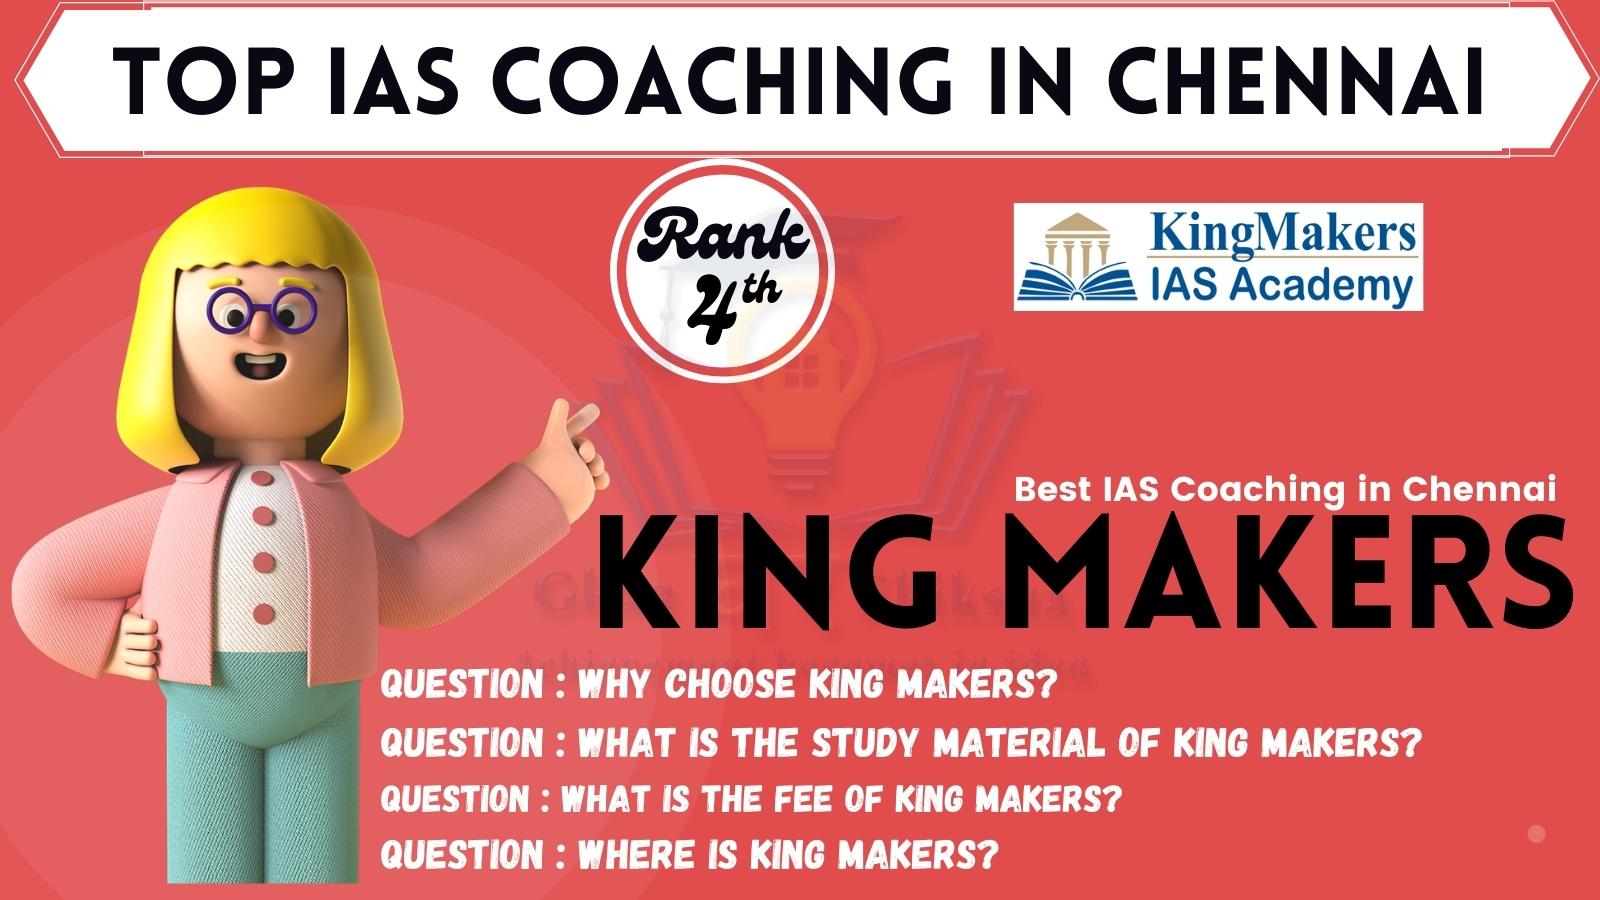 King Makers Best IAS Coaching in Chennai